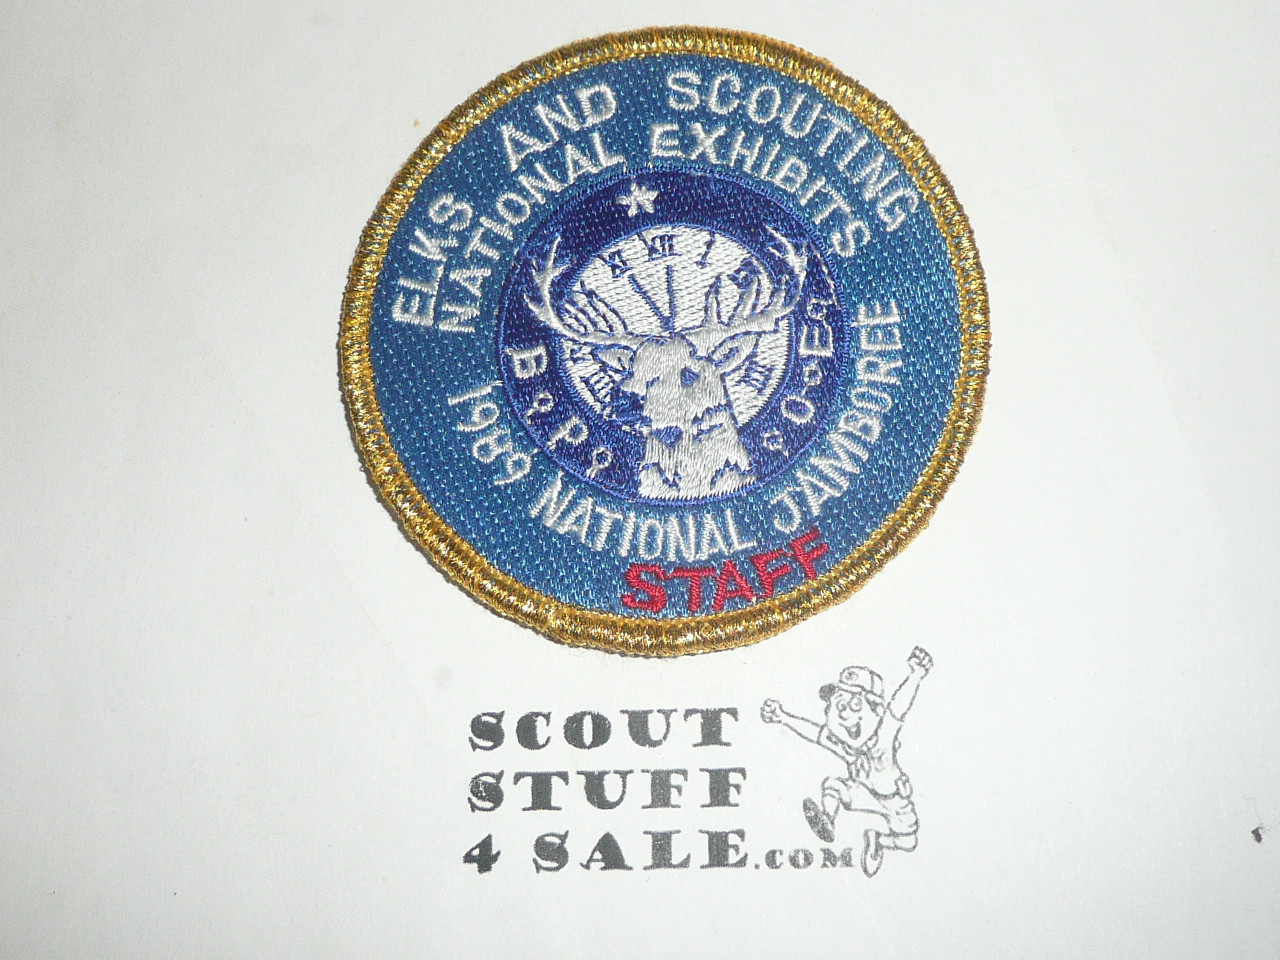 1989 National Jamboree Elks and Scouting Staff Patch, gold mylar